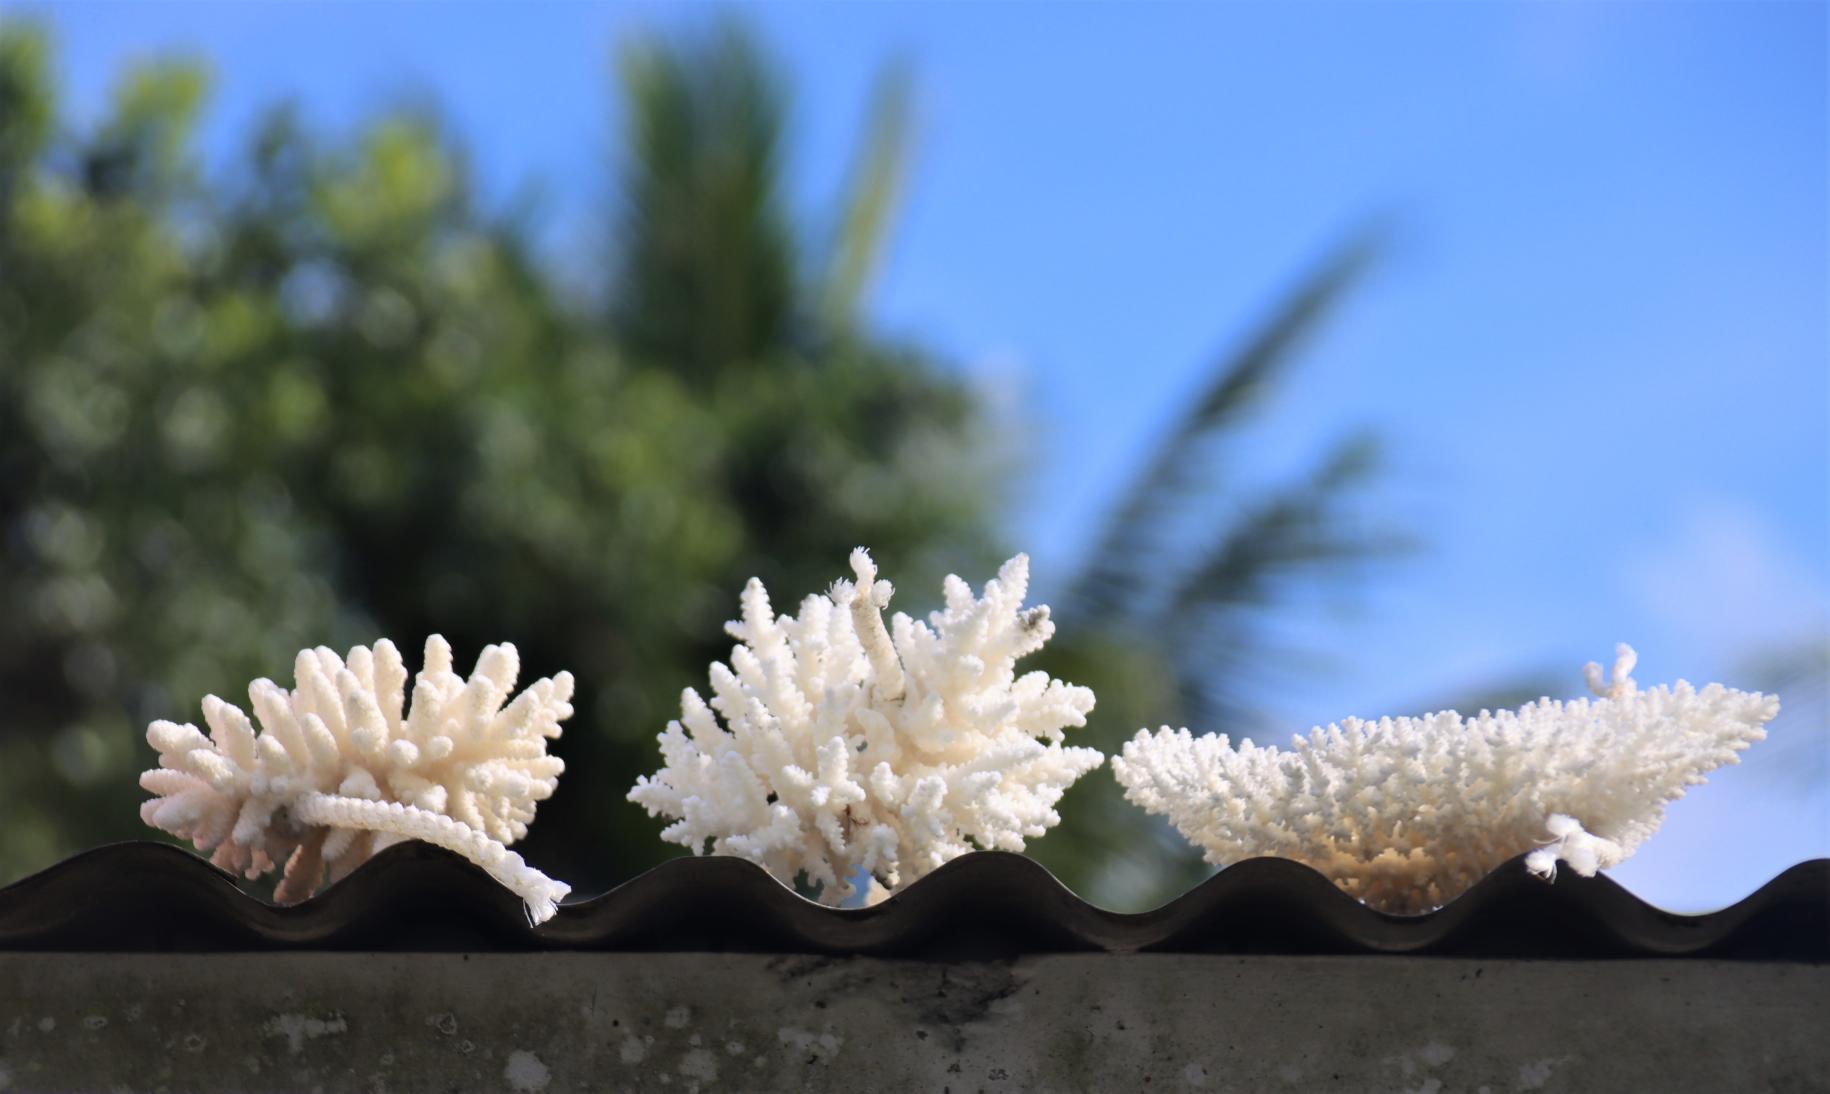  Drying out bleached coral in Fiji 